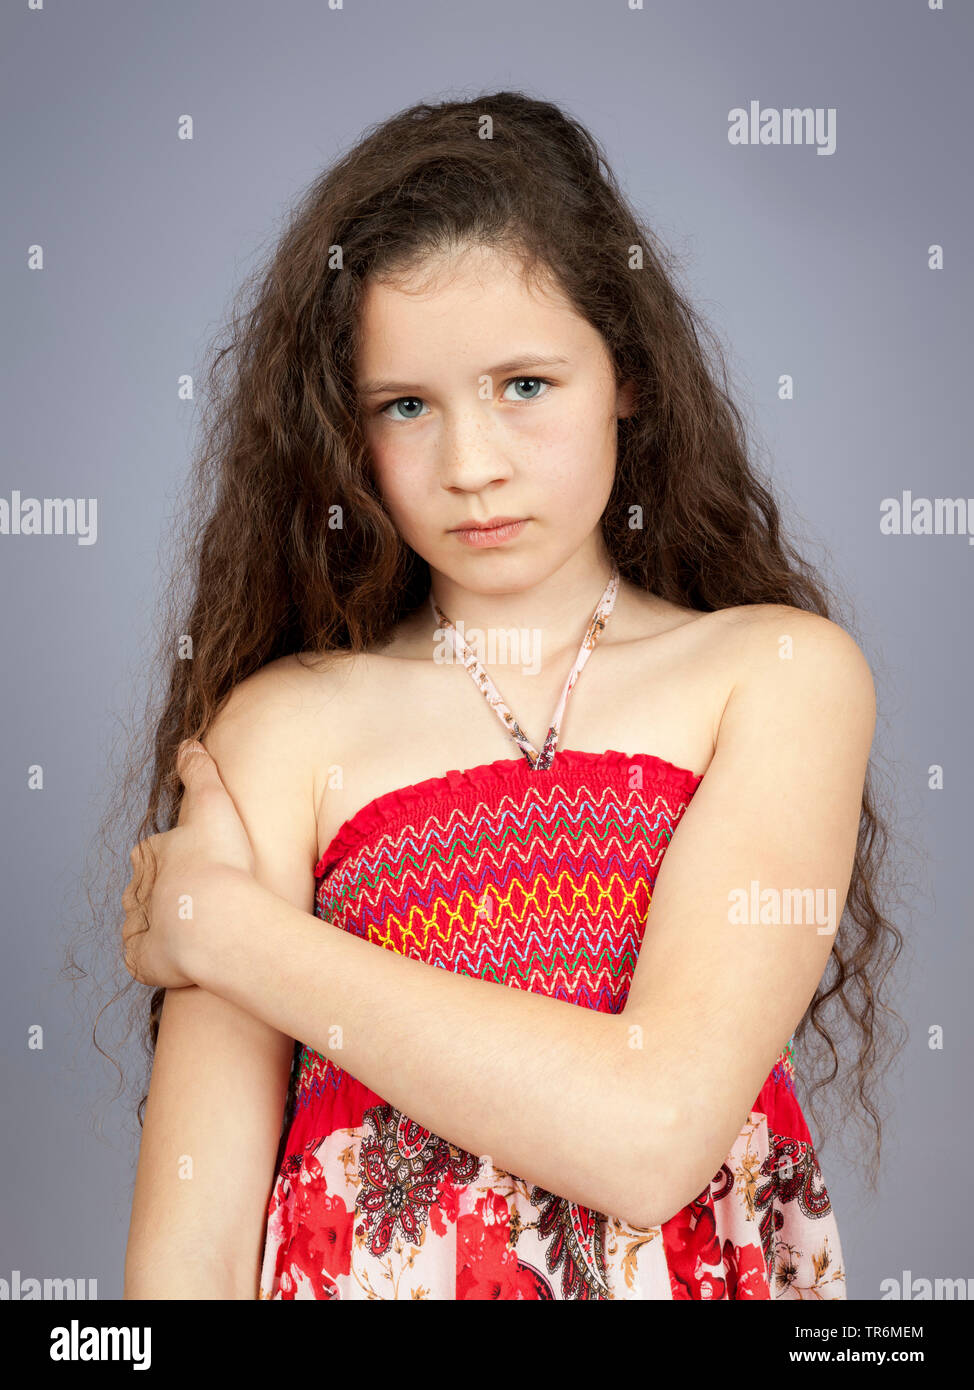 young handsome girl in a summer dress Stock Photo - Alamy